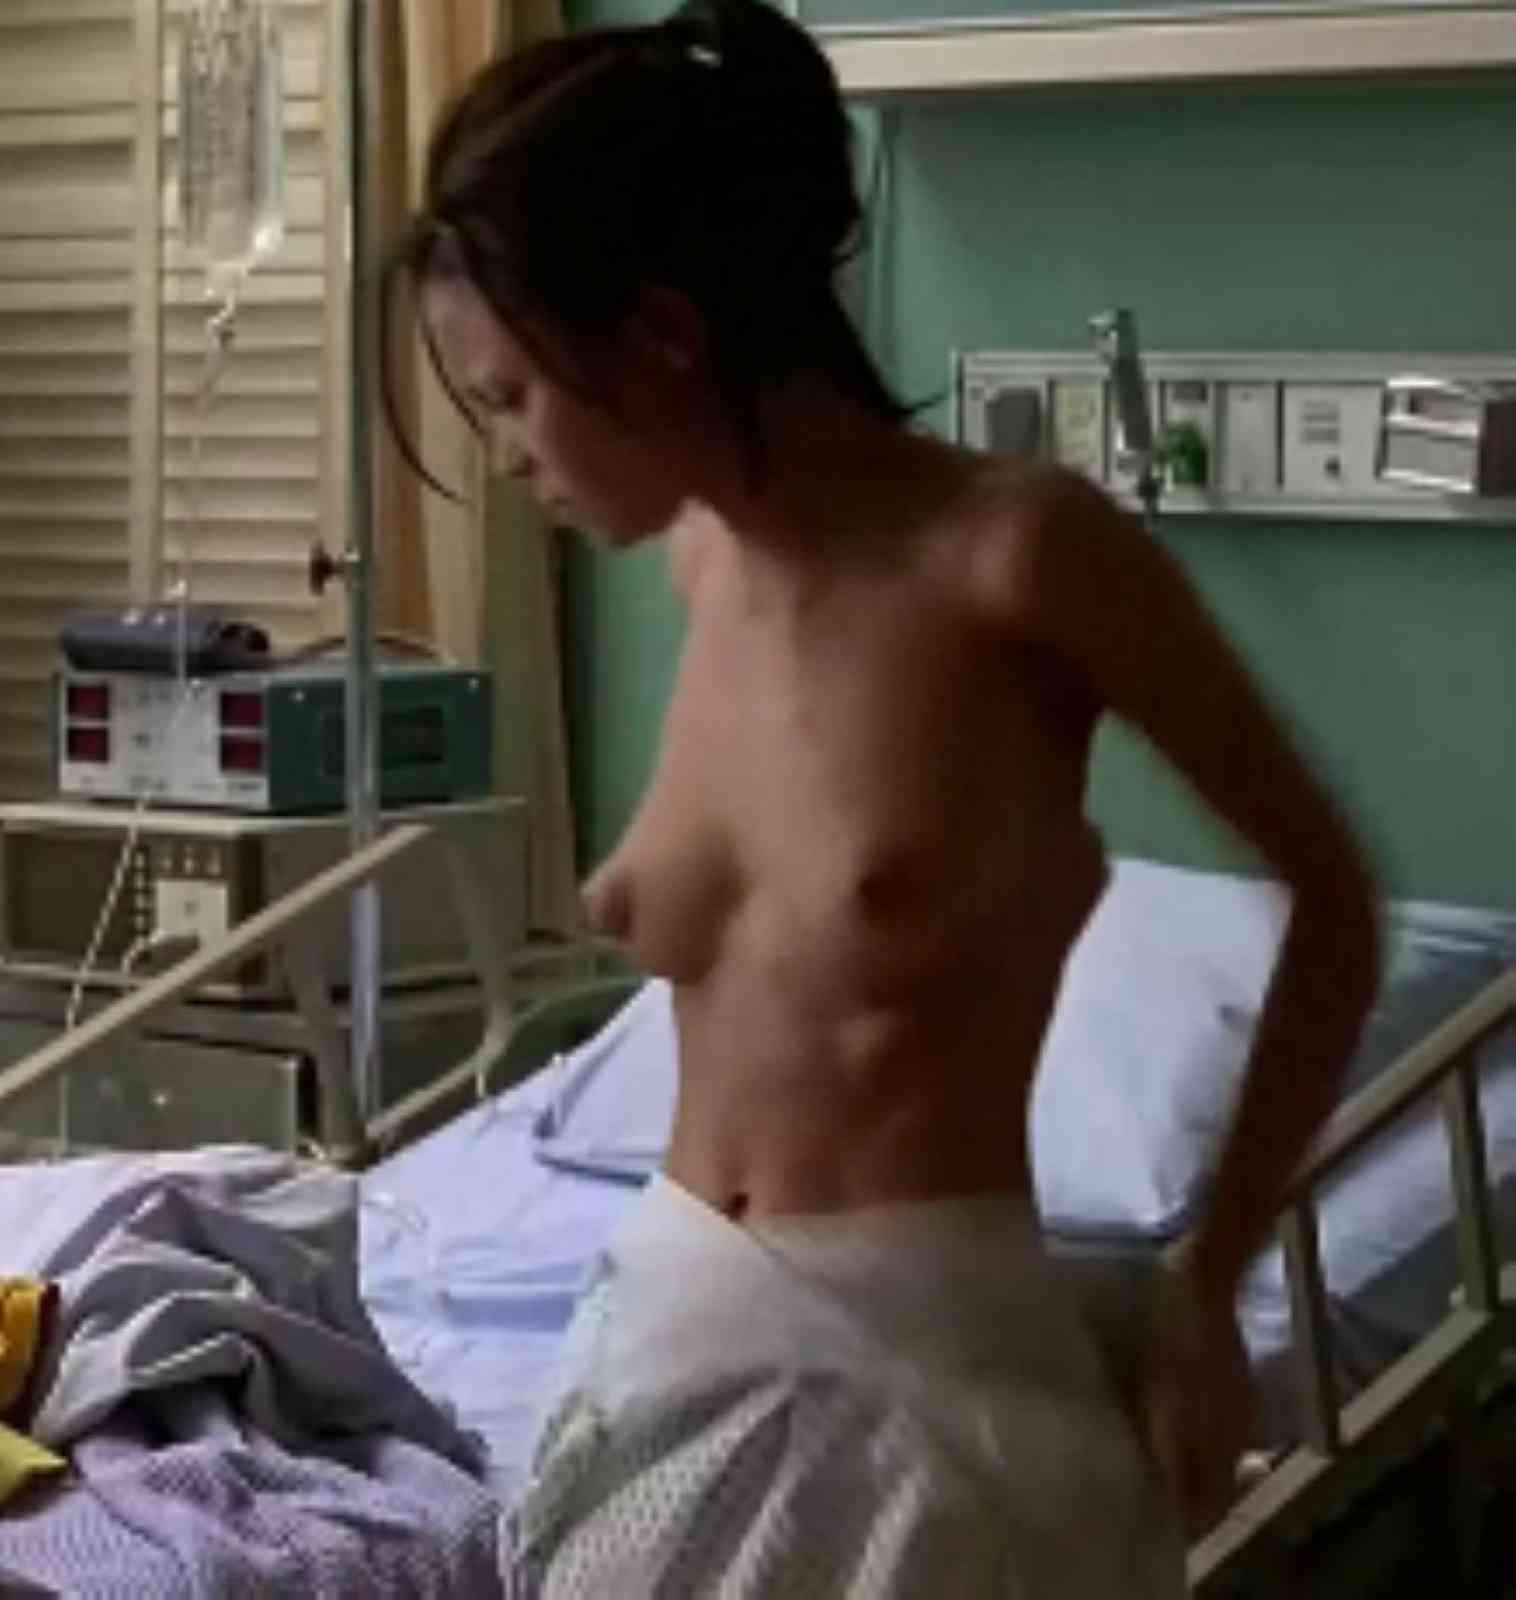 Thandie Newton Nude Revealing Her Private Parts.